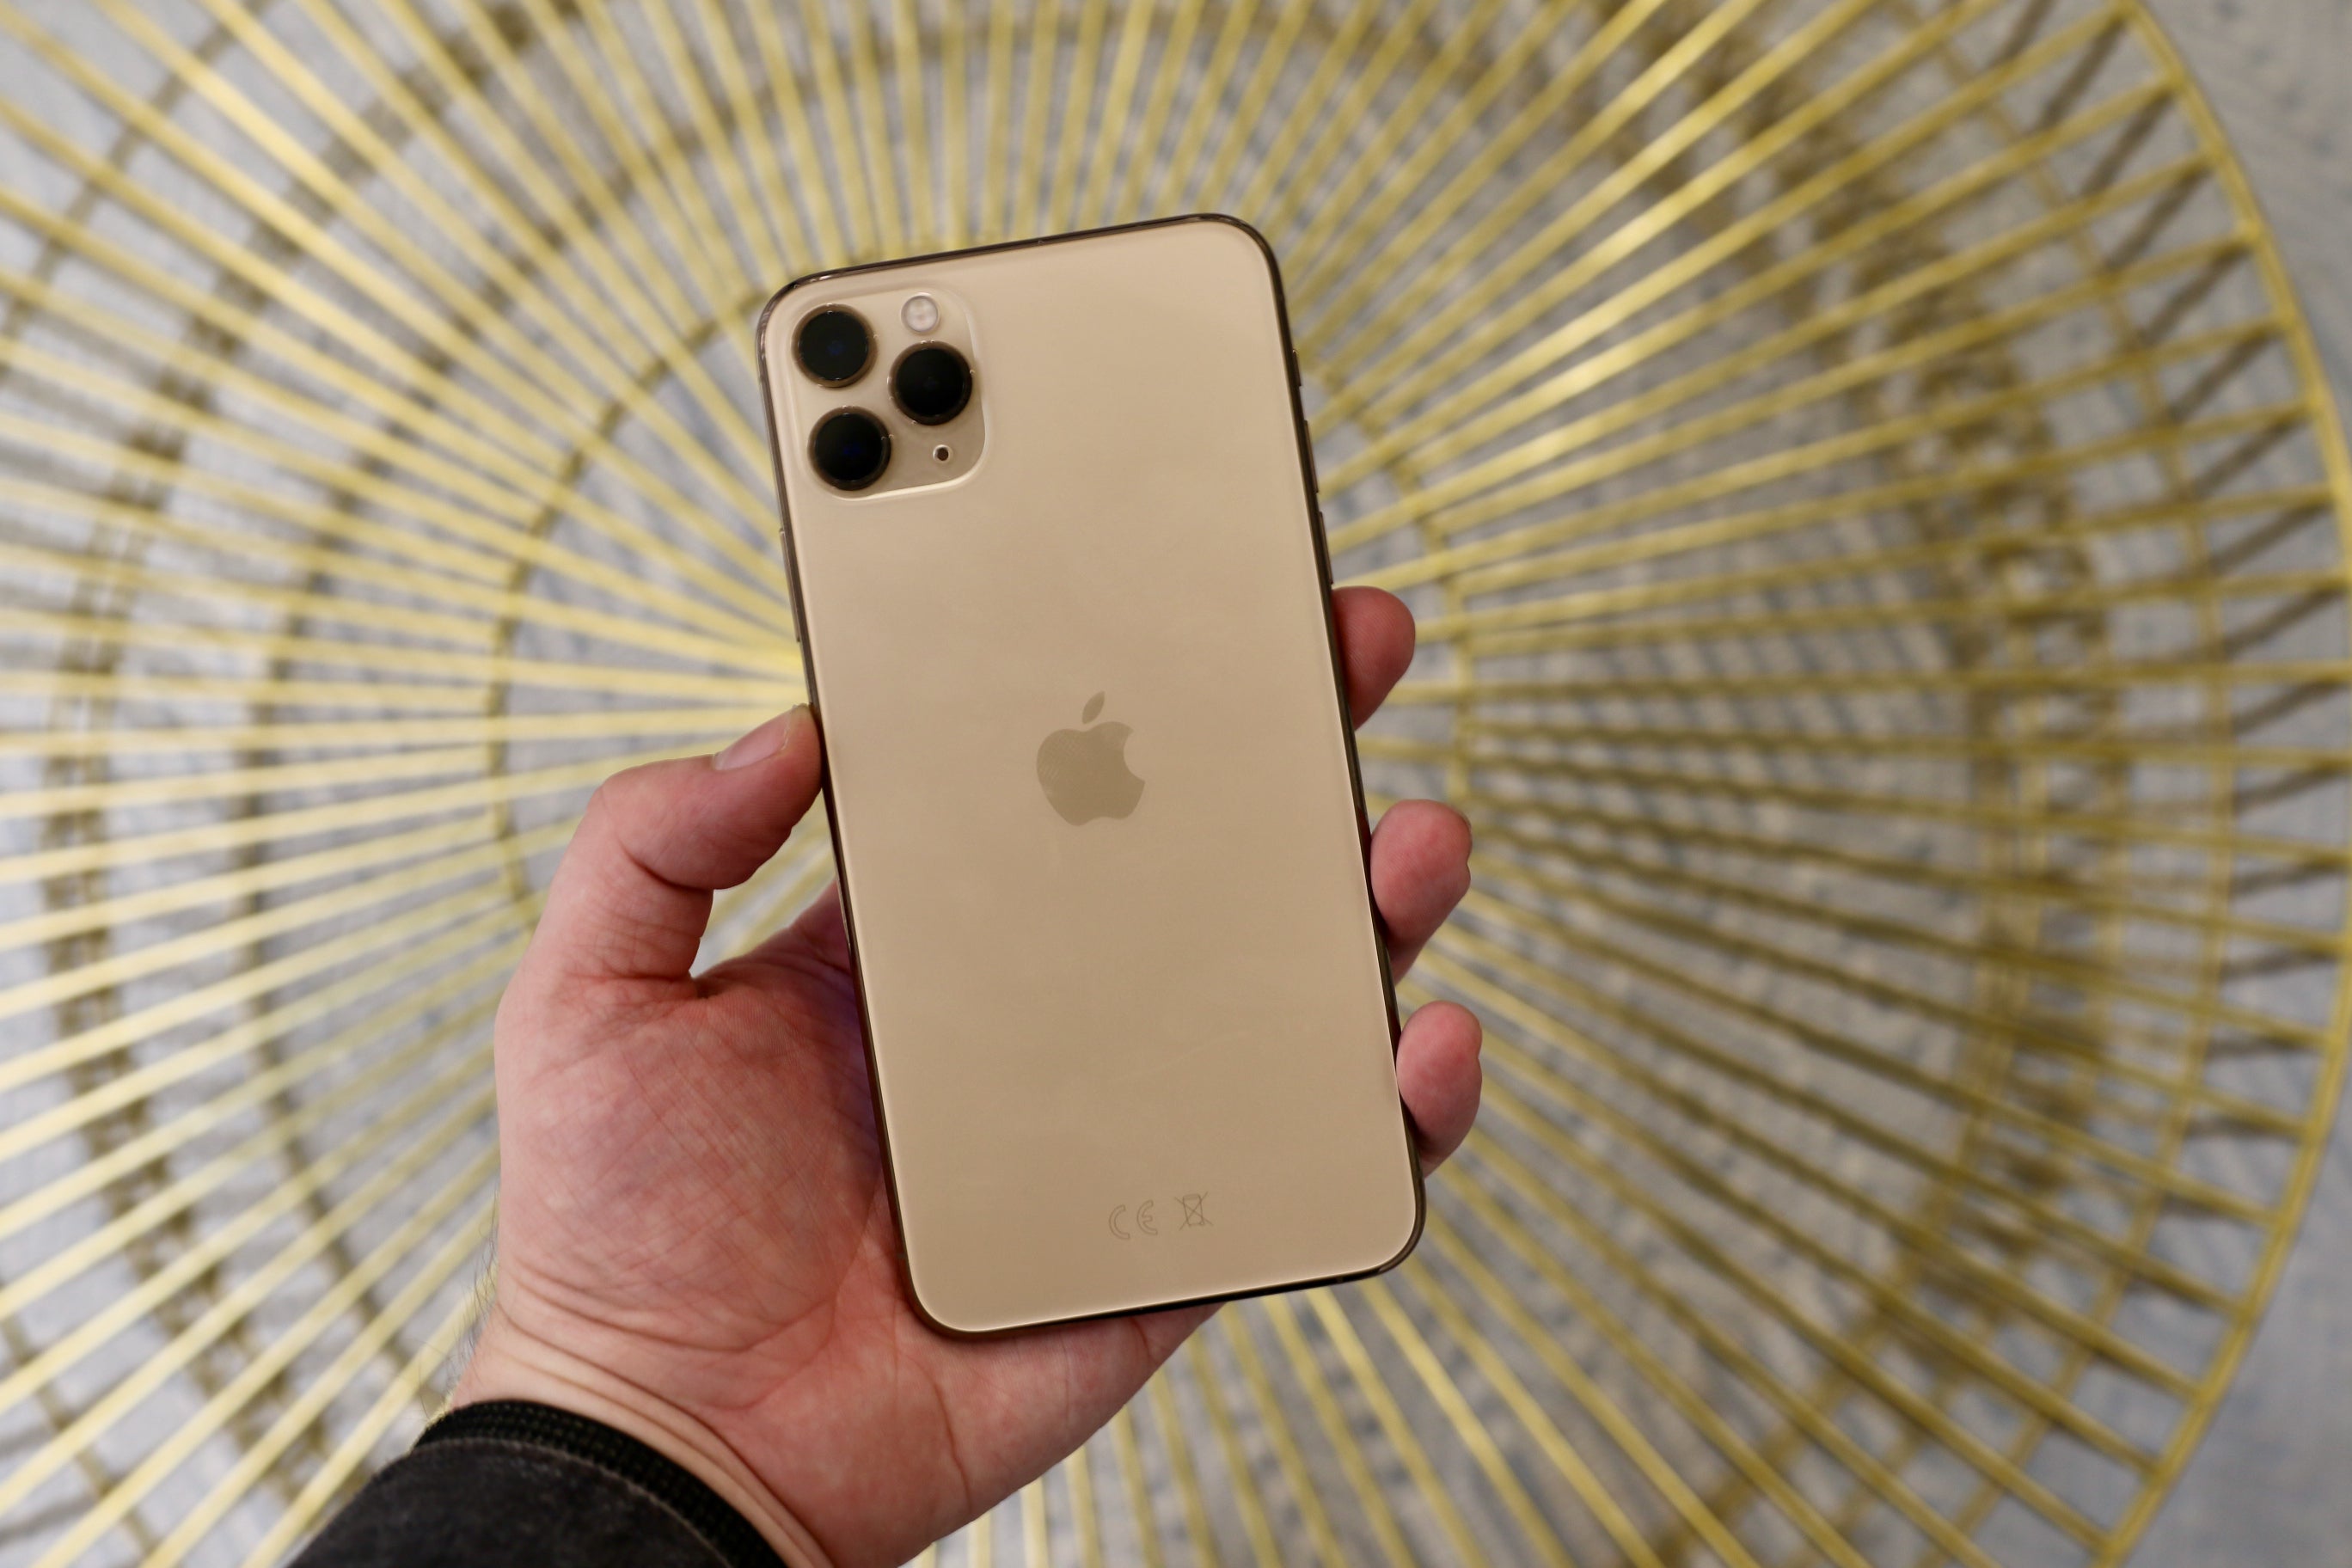 Iphone 11 Pro Max Plummets To The Price Of A Mid Range Phone